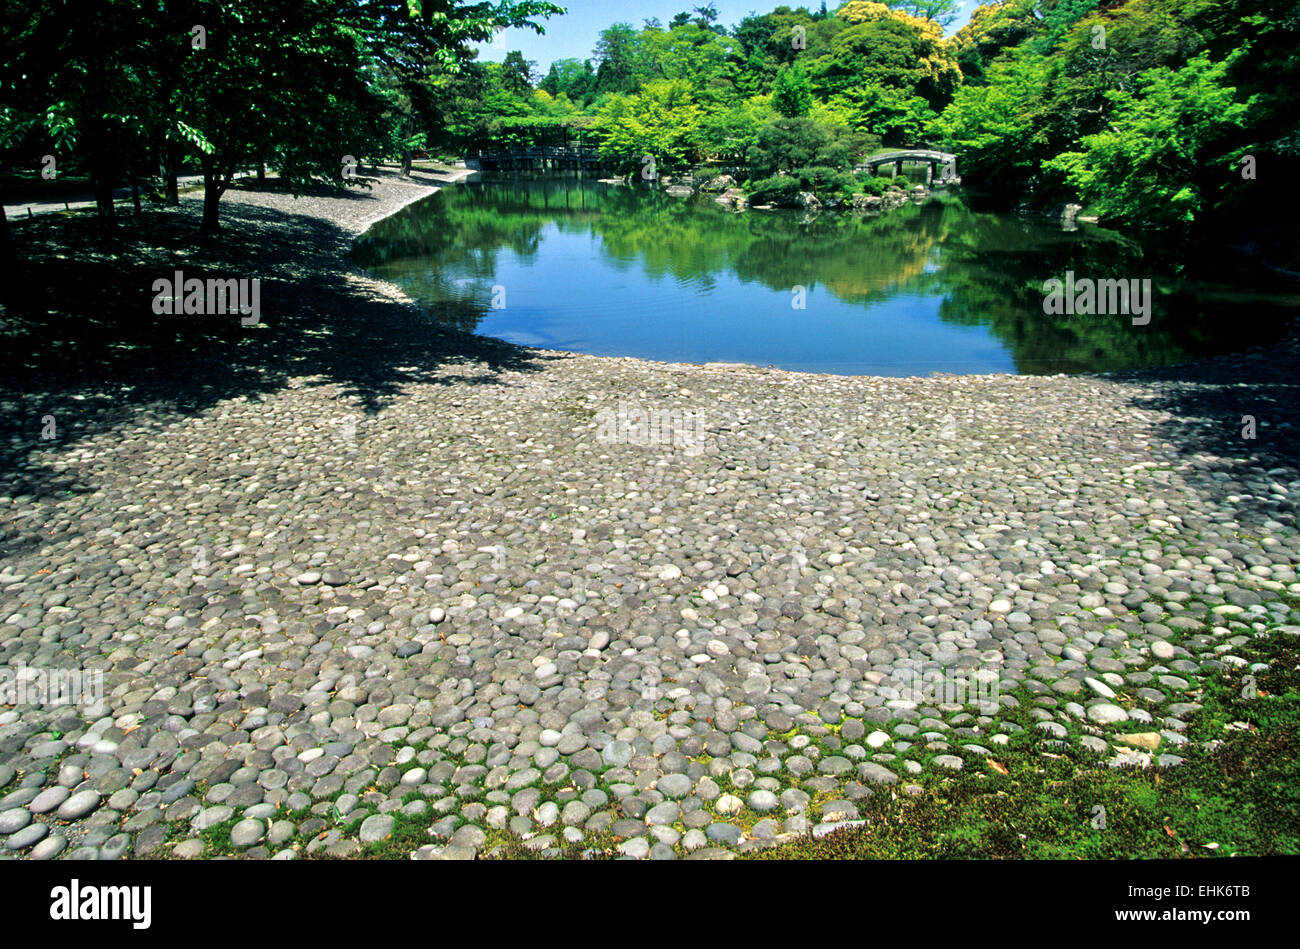 The Sento Gosho is a large enclosed garden on the grounds of the Imperial Palace in the center of Kyoto. Stock Photo